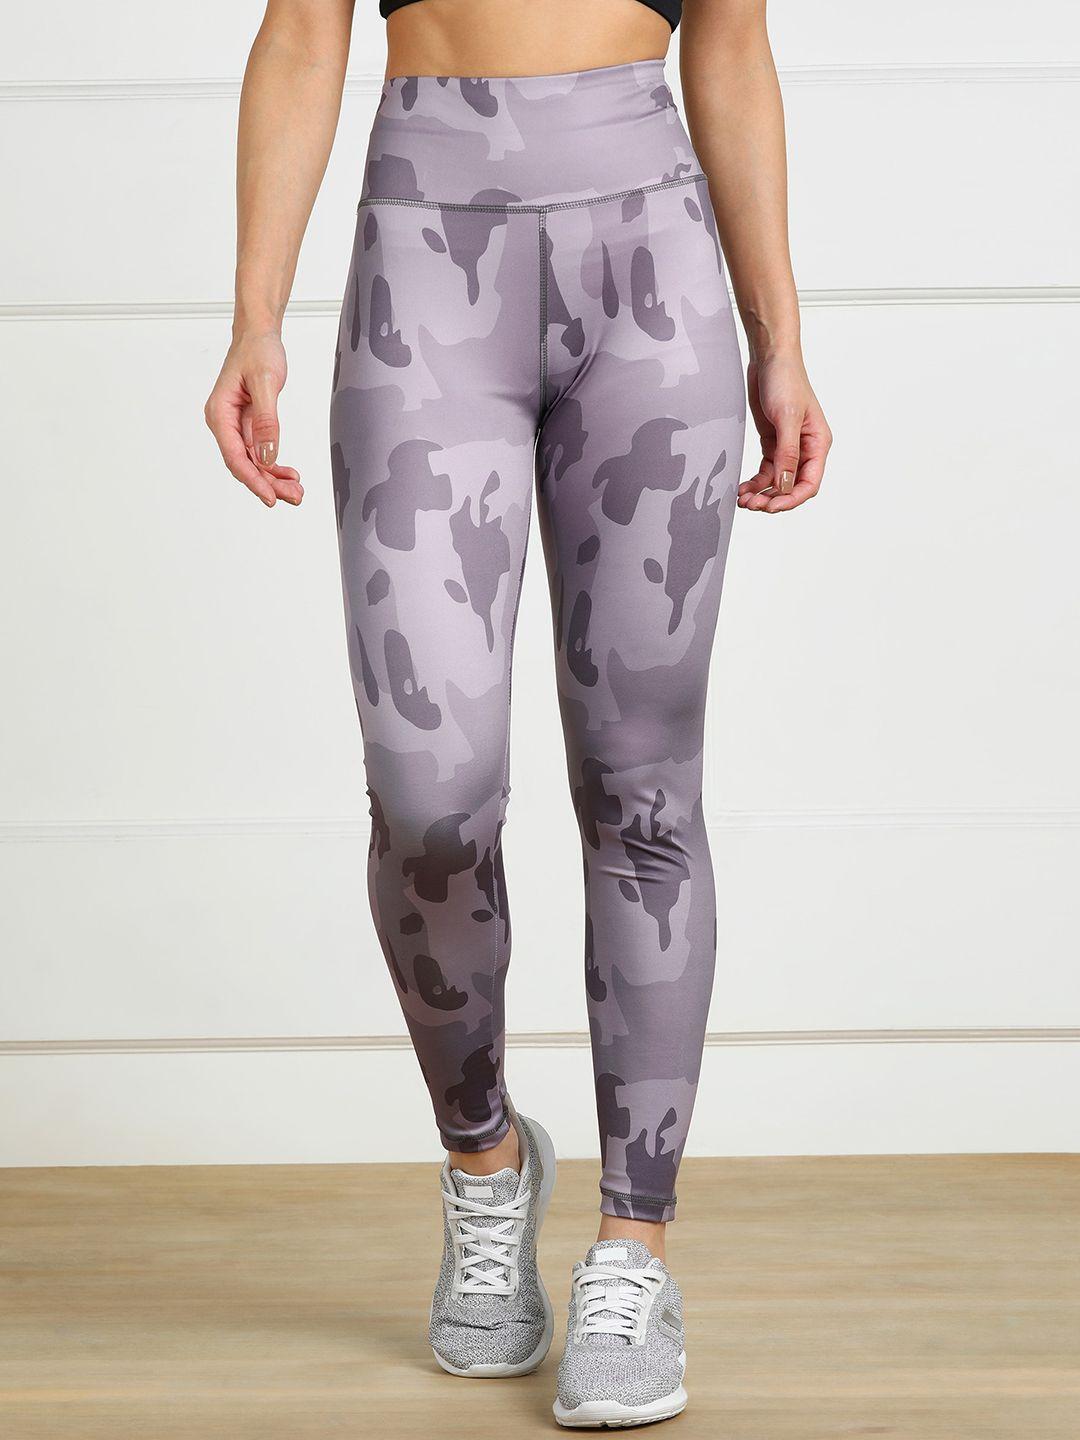 rock-paper-scissors-women-grey-camouflage-printed-ankle-length-tights